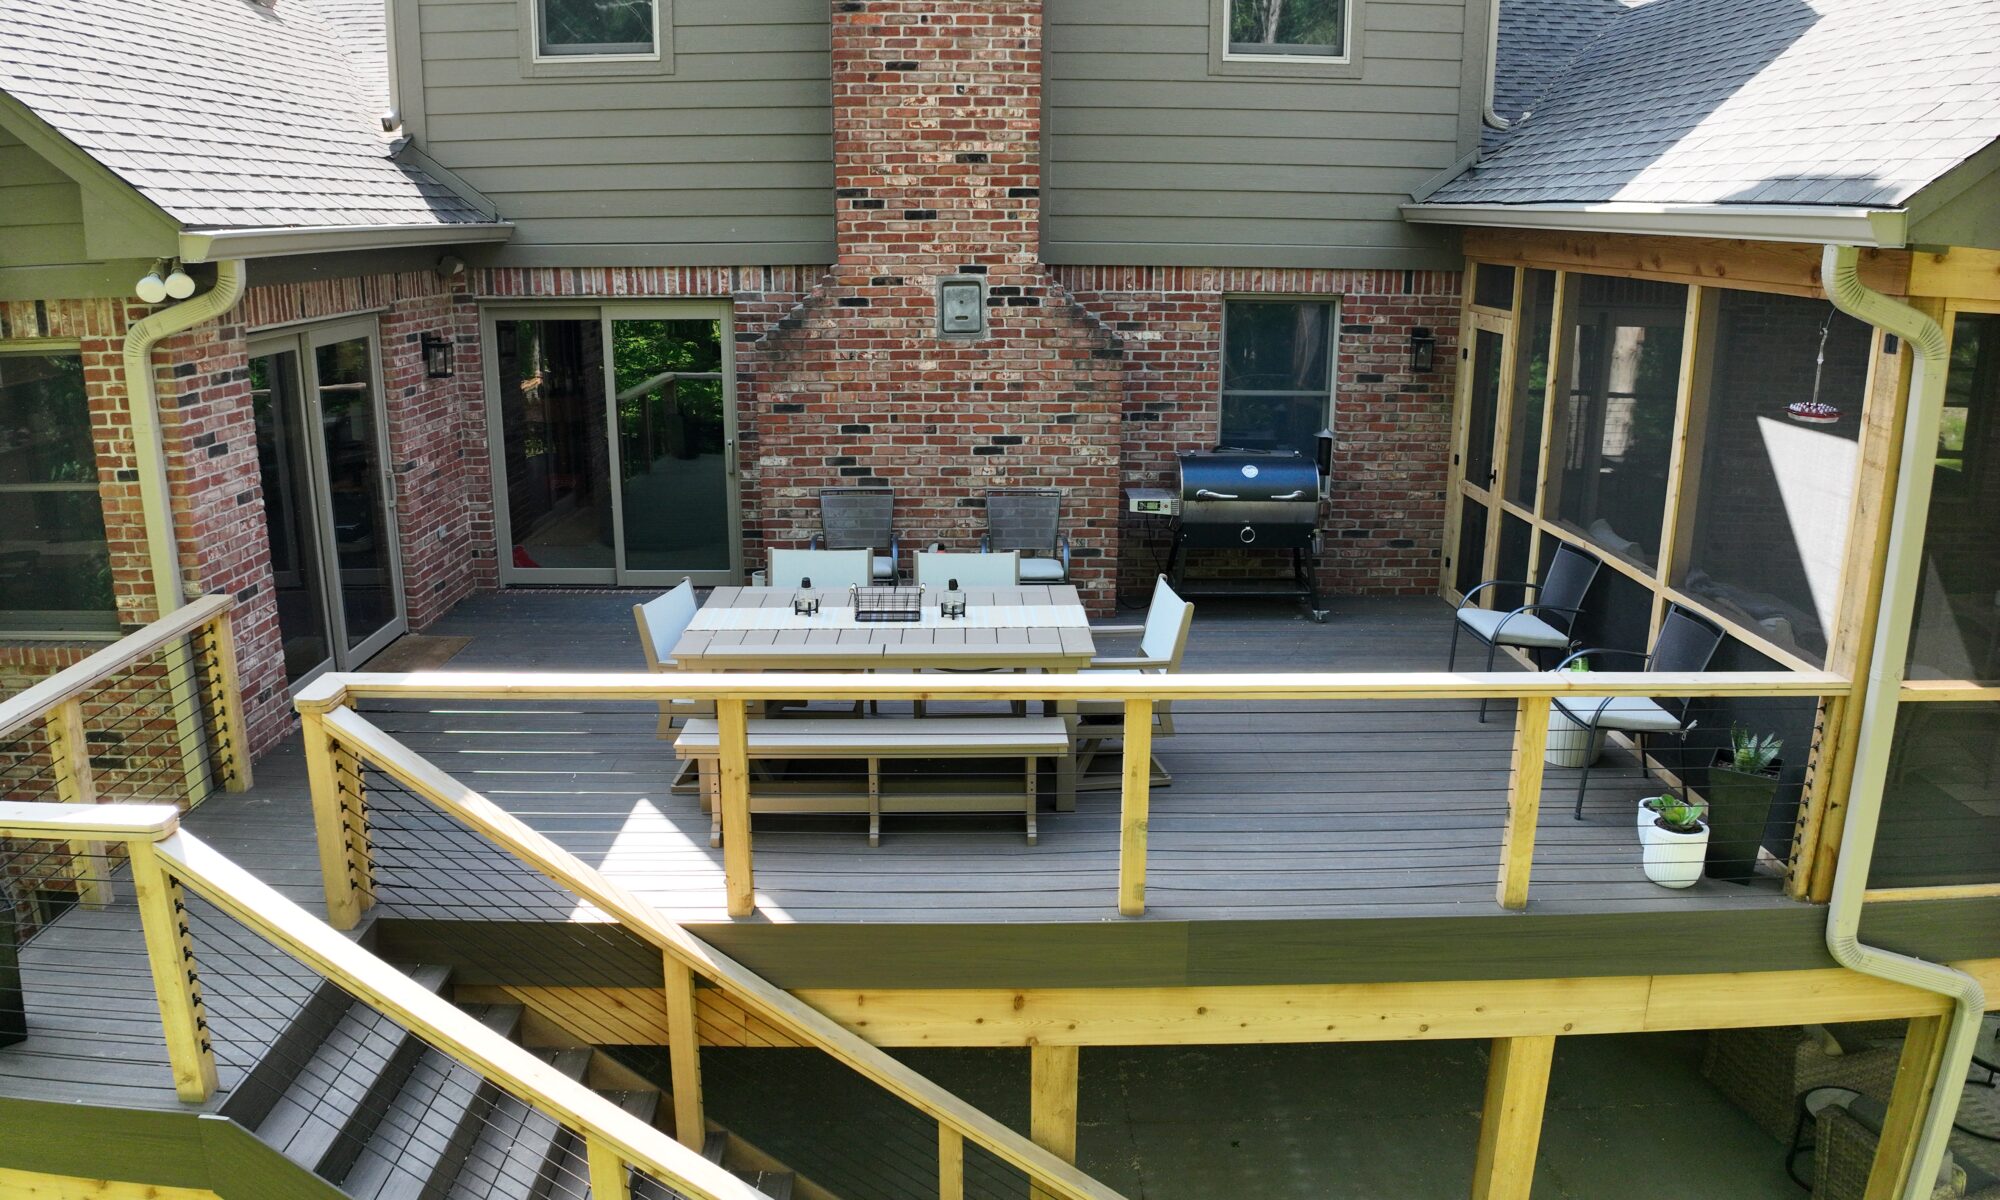 precision outdoors Bargersville elevated Exterior backyard remodel Trex composite decking concrete patio hot tub backyard goals dream backyard screened in porch outdoor living space dining area indiana exterior design relaxing outdoors tongue and groove ceiling modern cable railing custom rock landscaping walkway